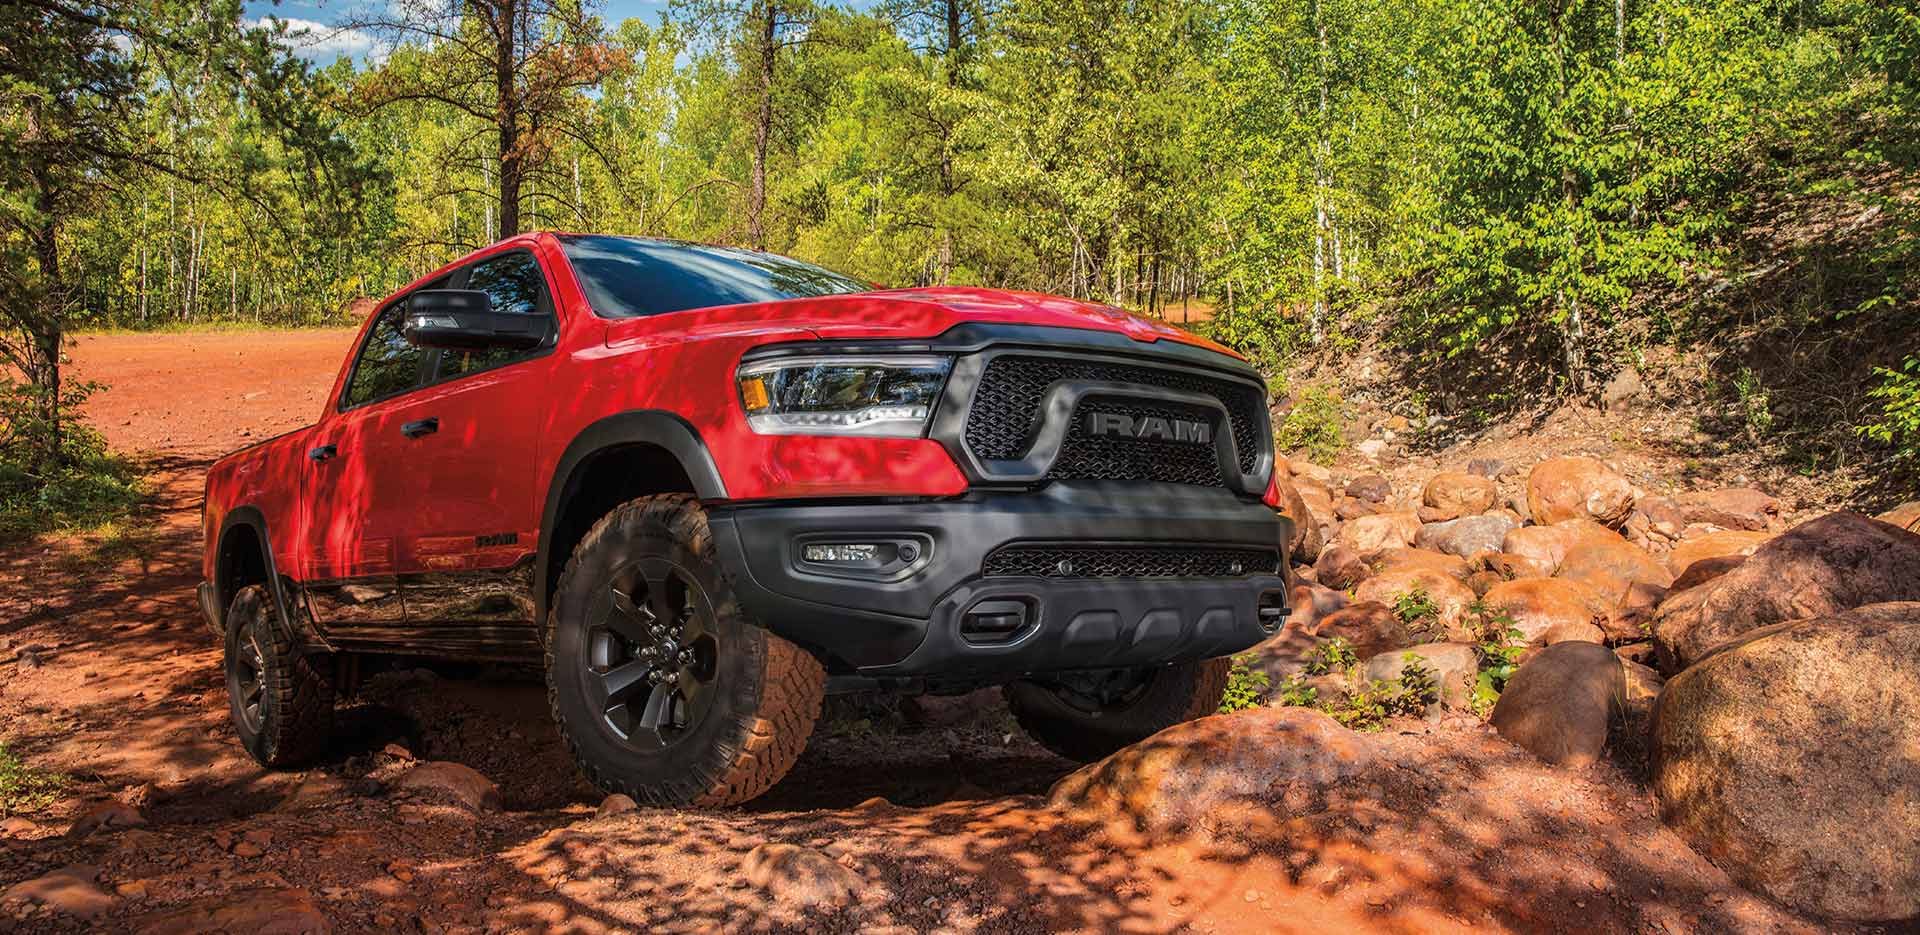 Display The 2023 Ram 1500 being driven off-road on a red rock trail.